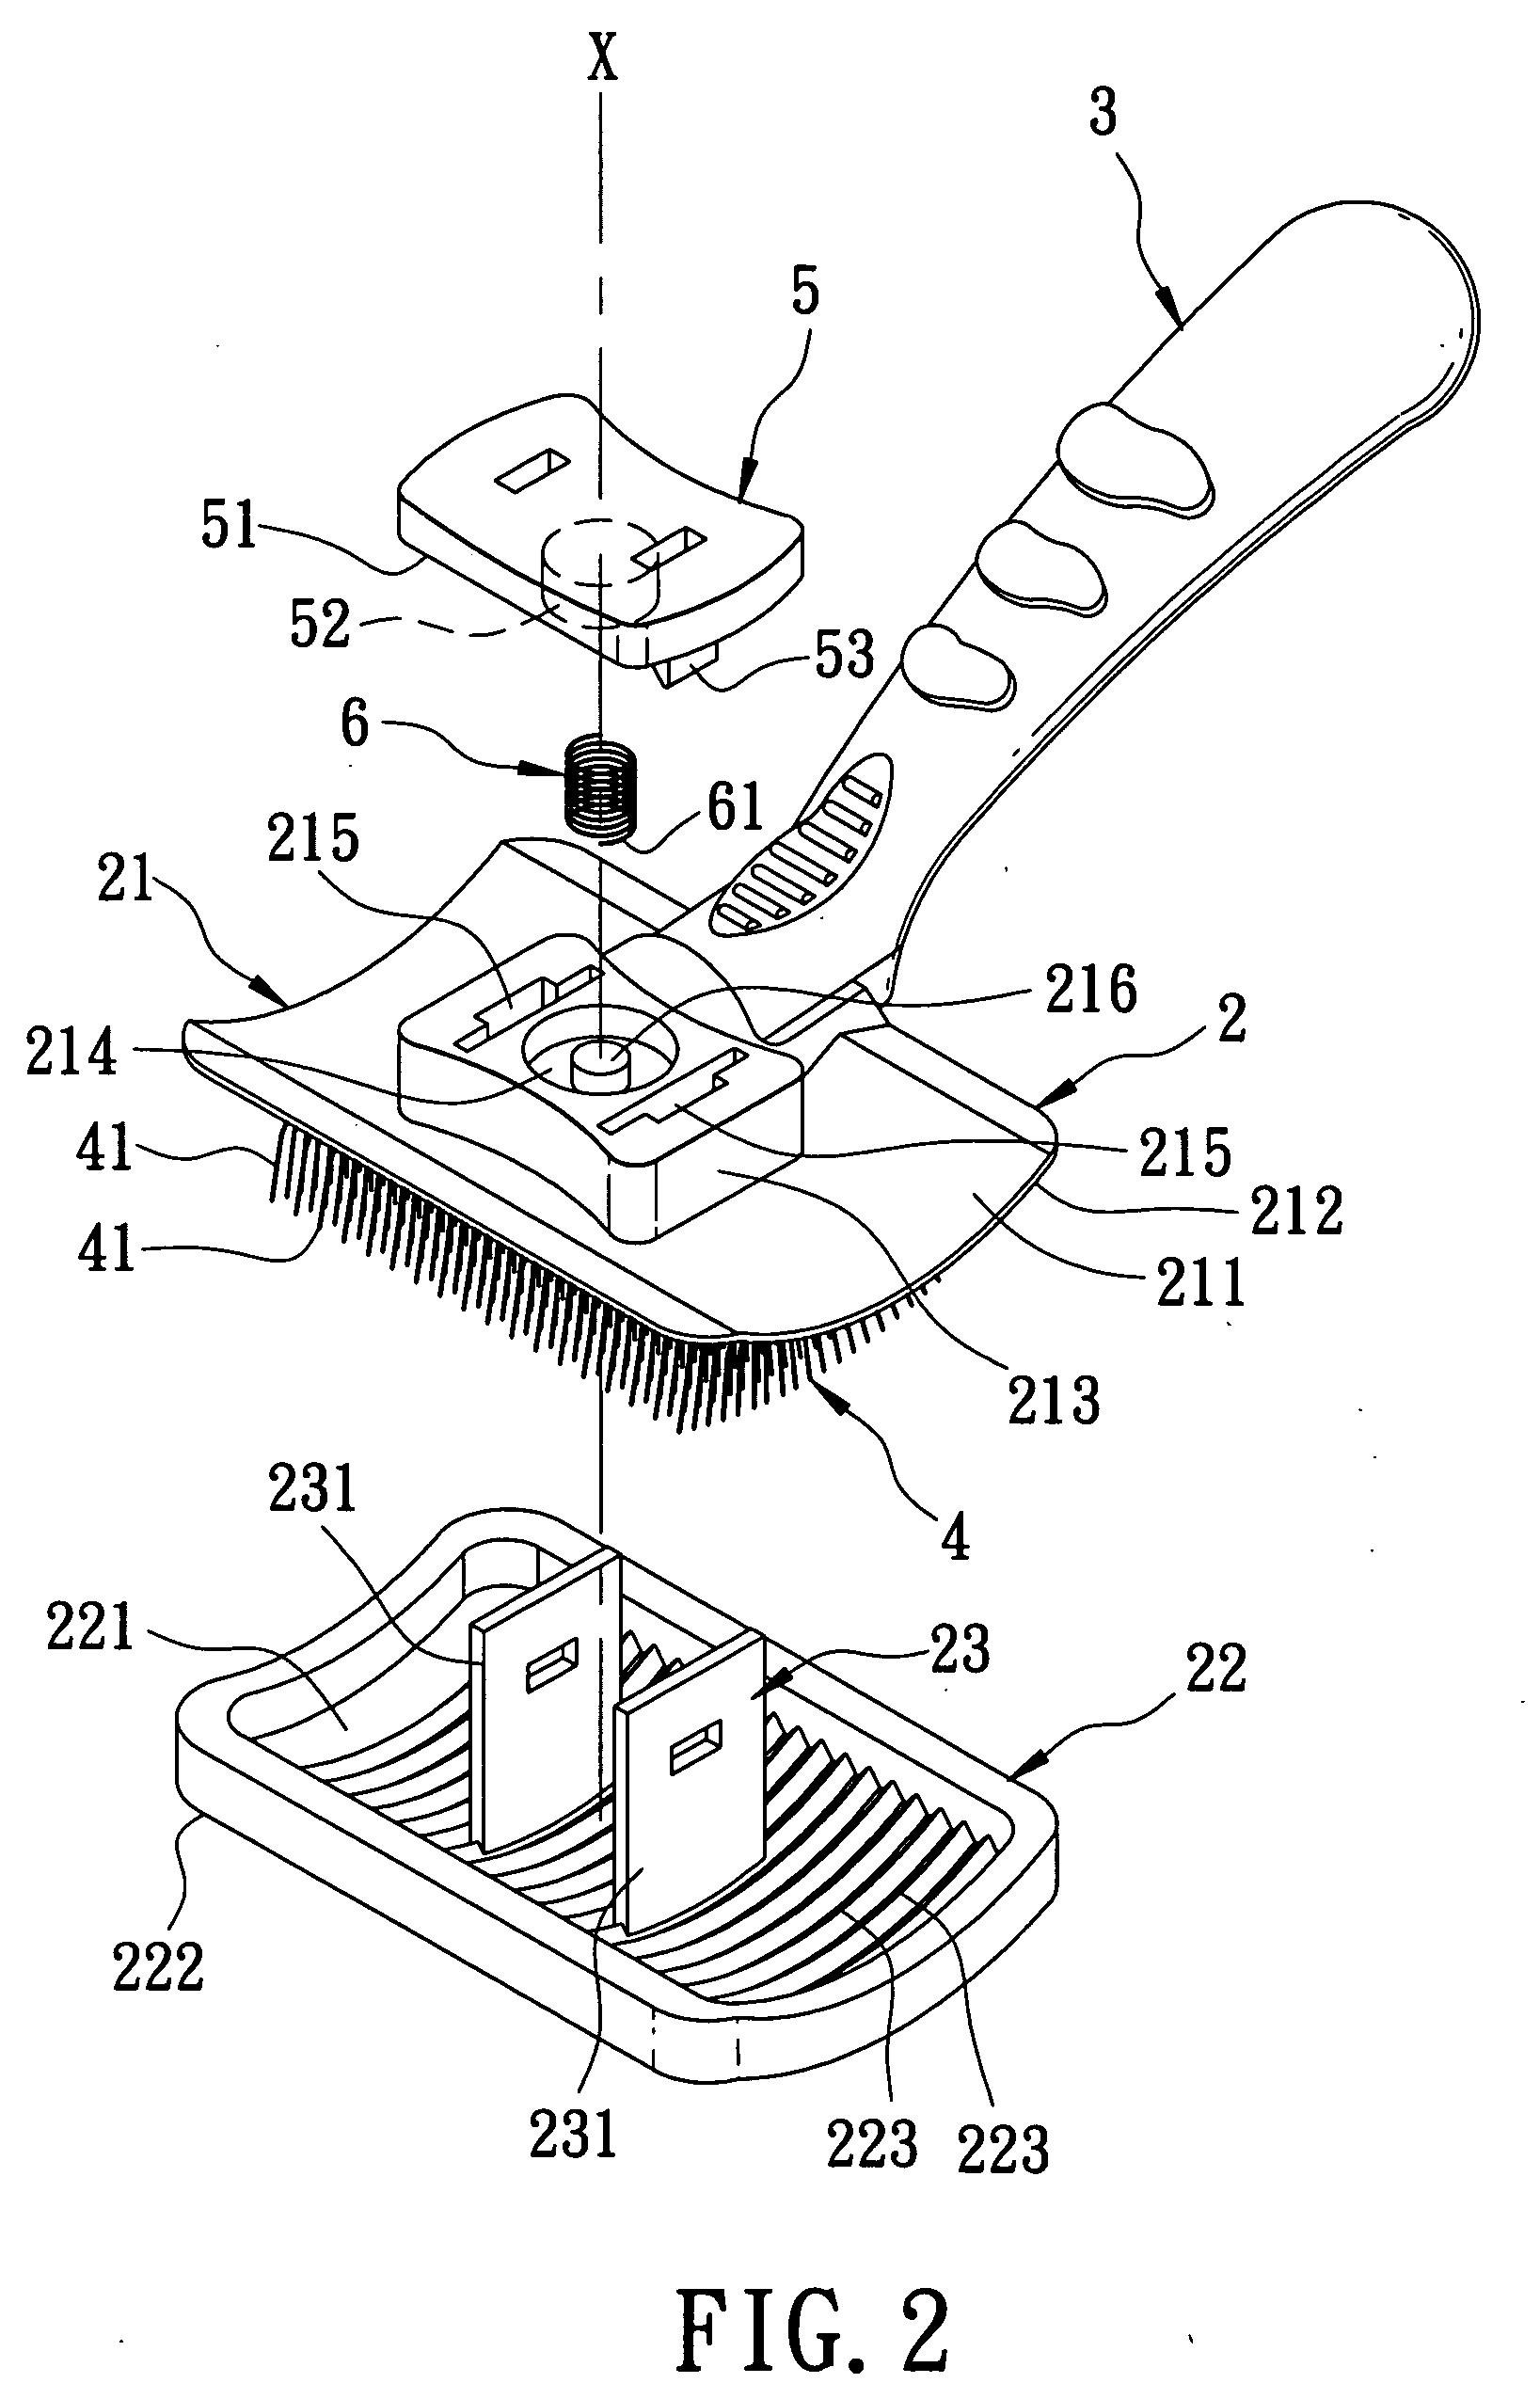 Brush provided with retractable bristles to facilitate removal of tangled hair strands